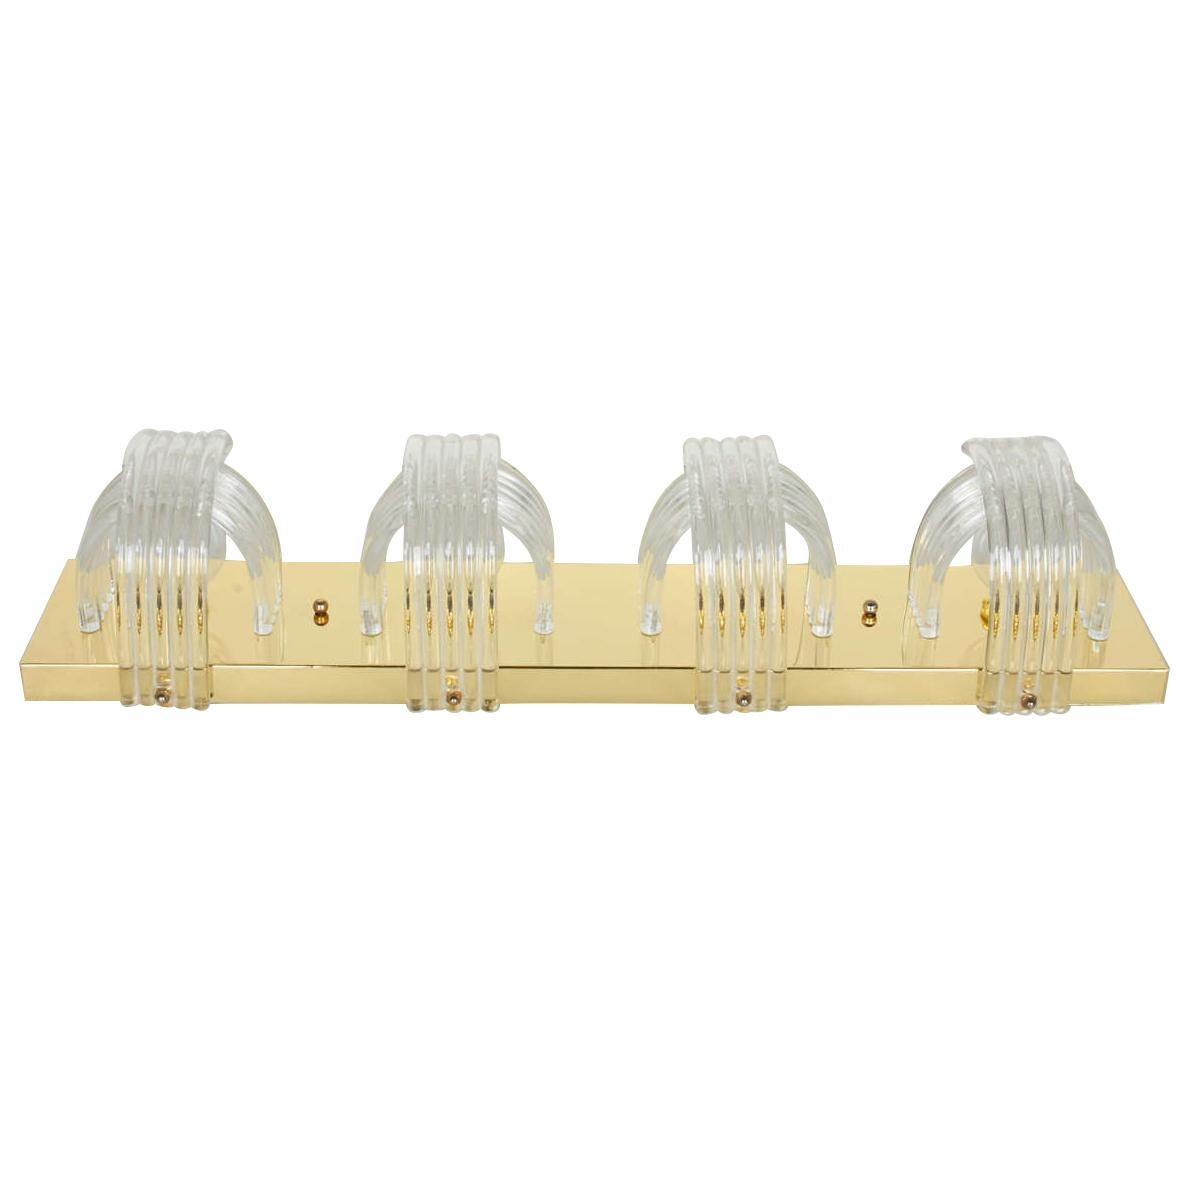 Mid-Century Modern Hollywood Regency wall sconce comprised of a polished brass frame, with shades made of sculpted Lucite rods. The four series of curved Lucite rings create beautiful prism lighting, while concealing the light bulbs. Perfect